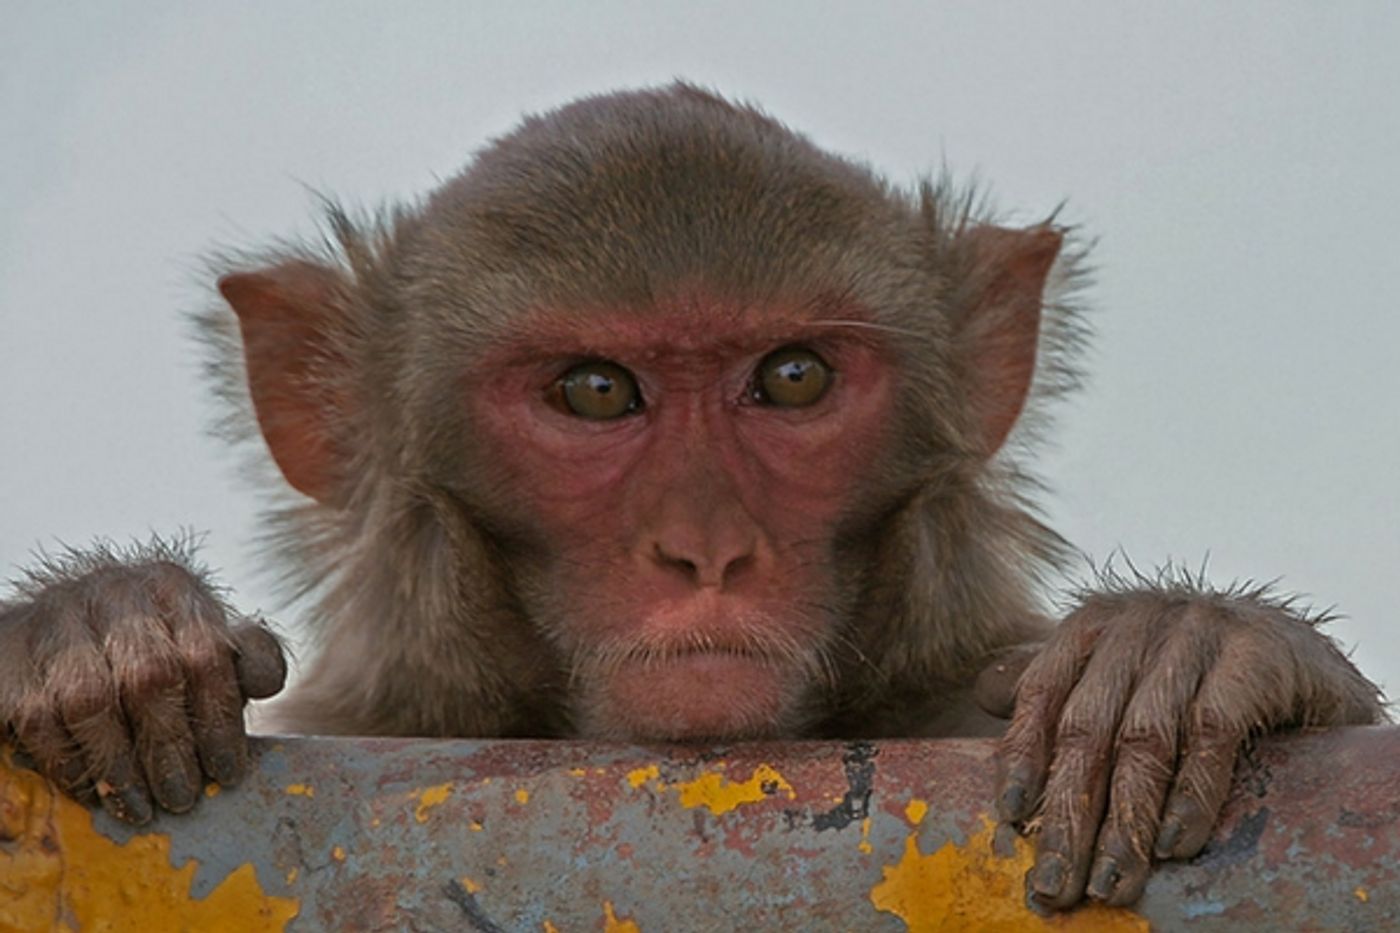 Monkeys can learn to type